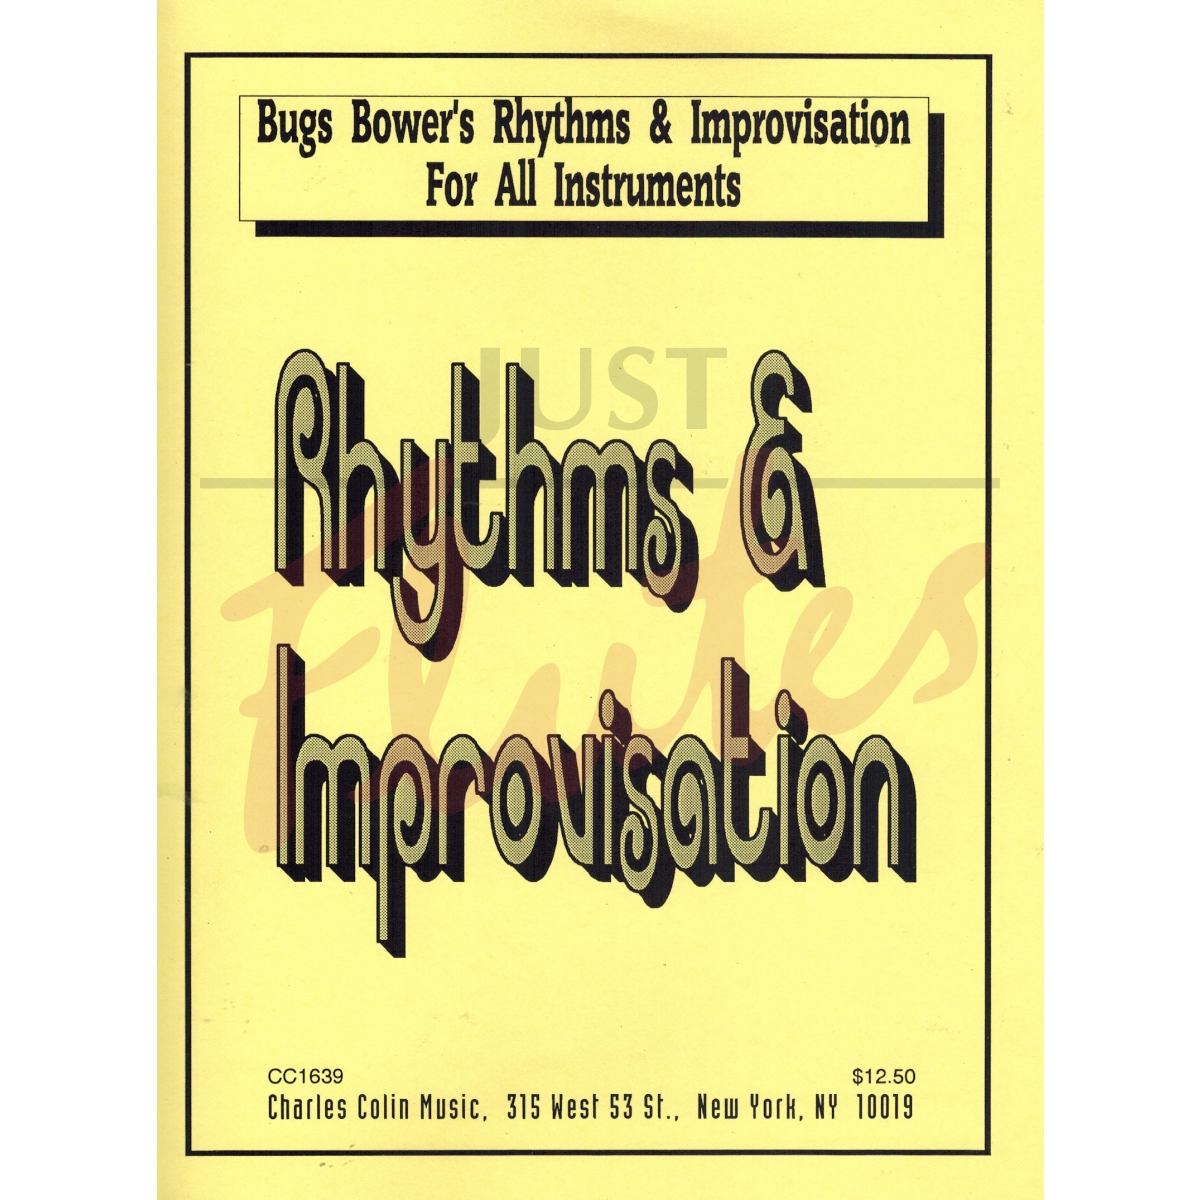 Rhythms and Improvisation for all instruments